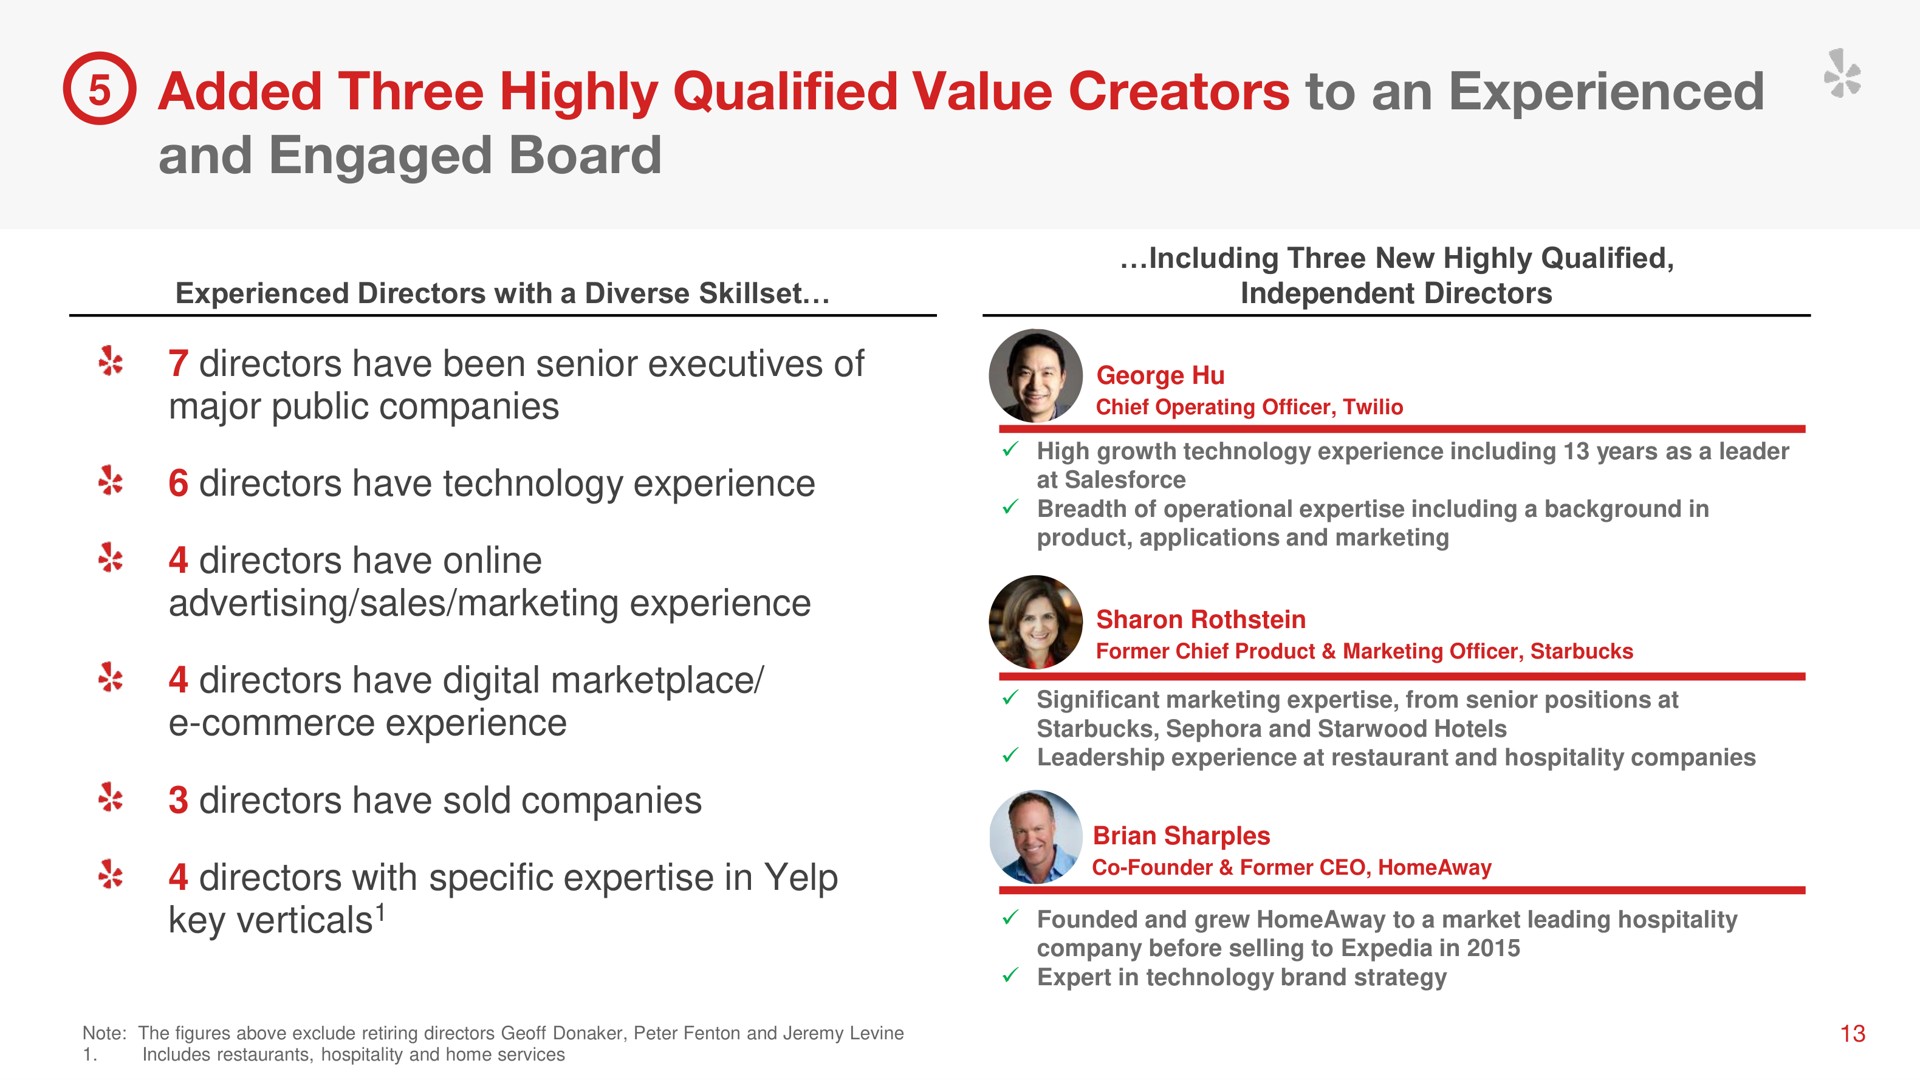 added three highly qualified value creators to an experienced and engaged board | Yelp